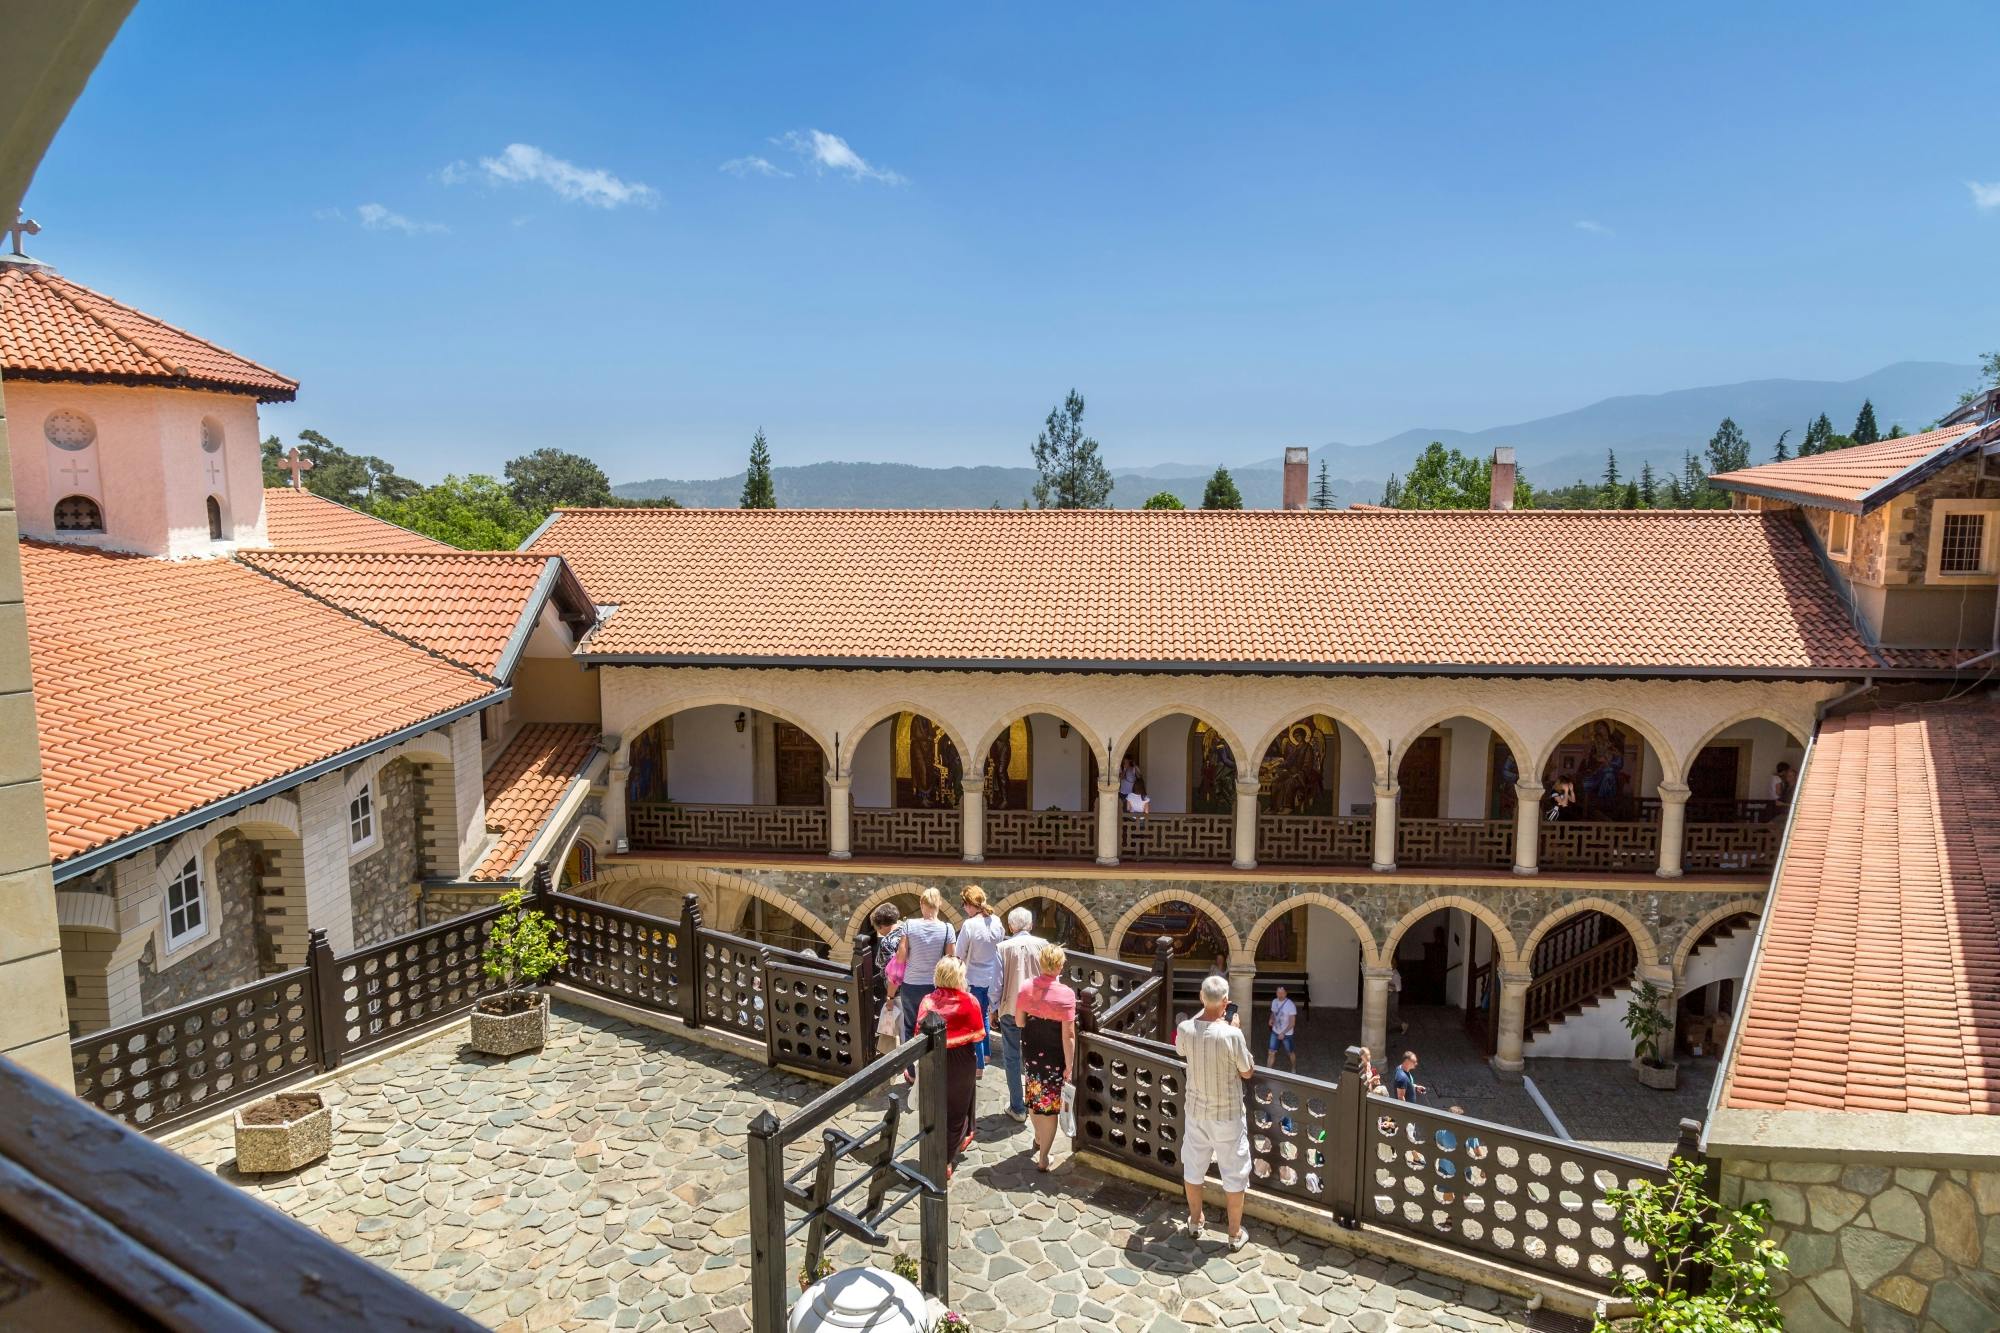 Small Group Tour of Troodos Villages with Kykkos and Lunch